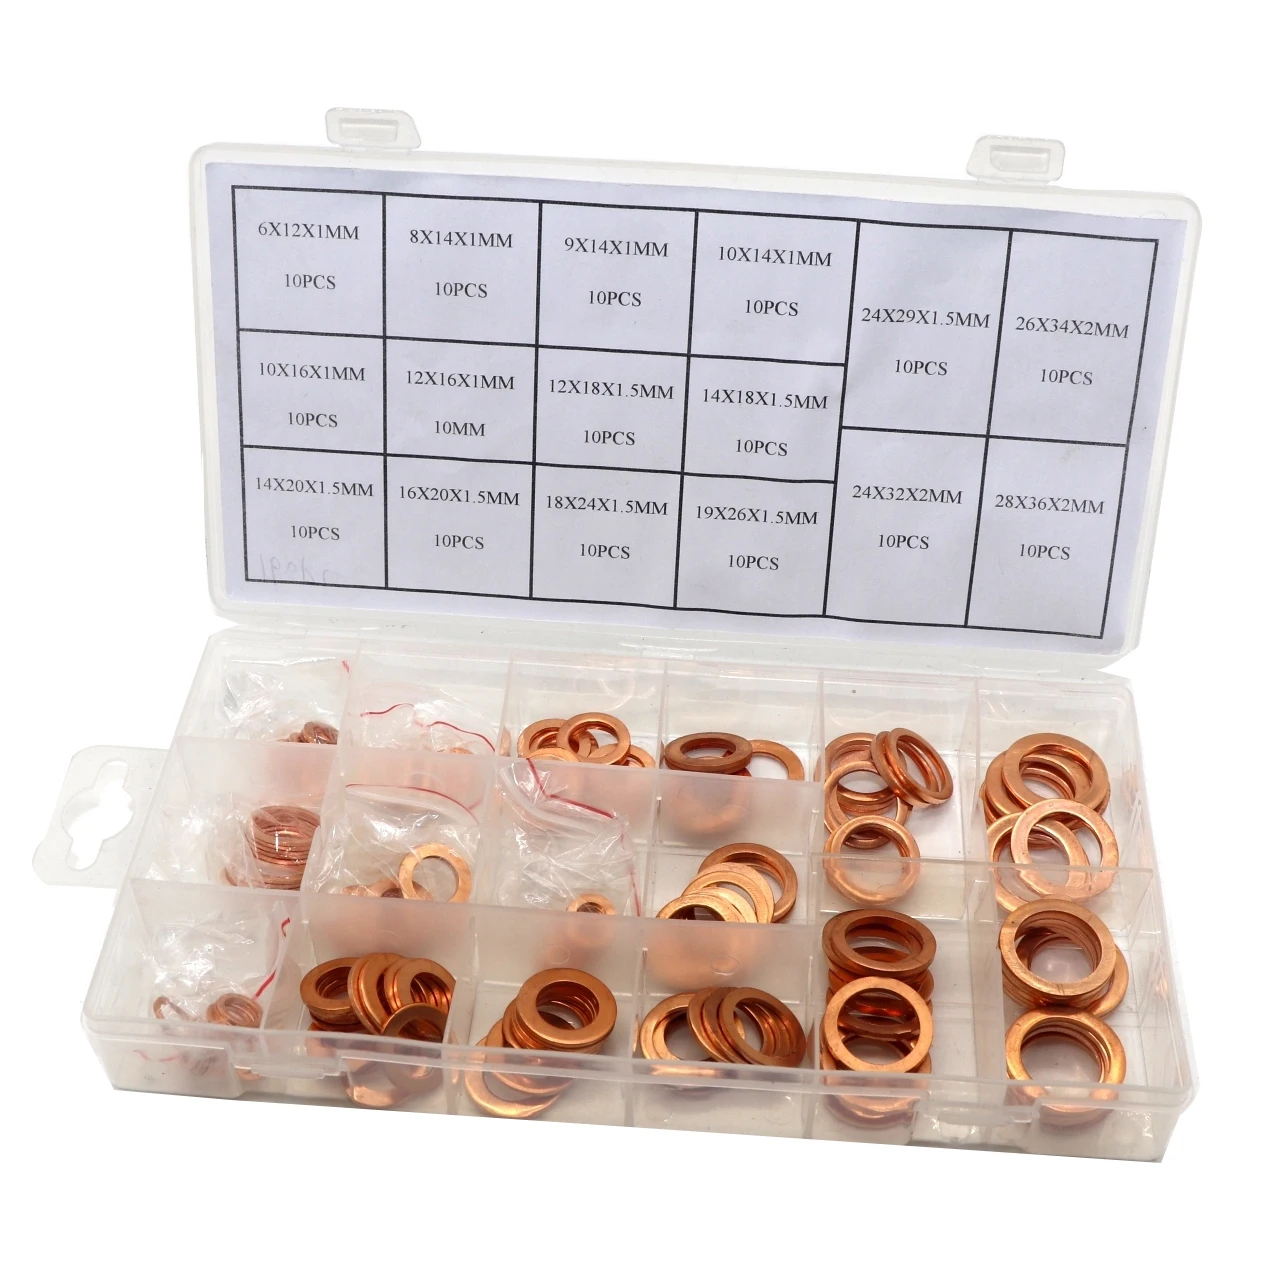 110Pcs Kit 6 Sizes Car Assorted Solid Copper Crush Washers Seal Flat Ring w/ Box 